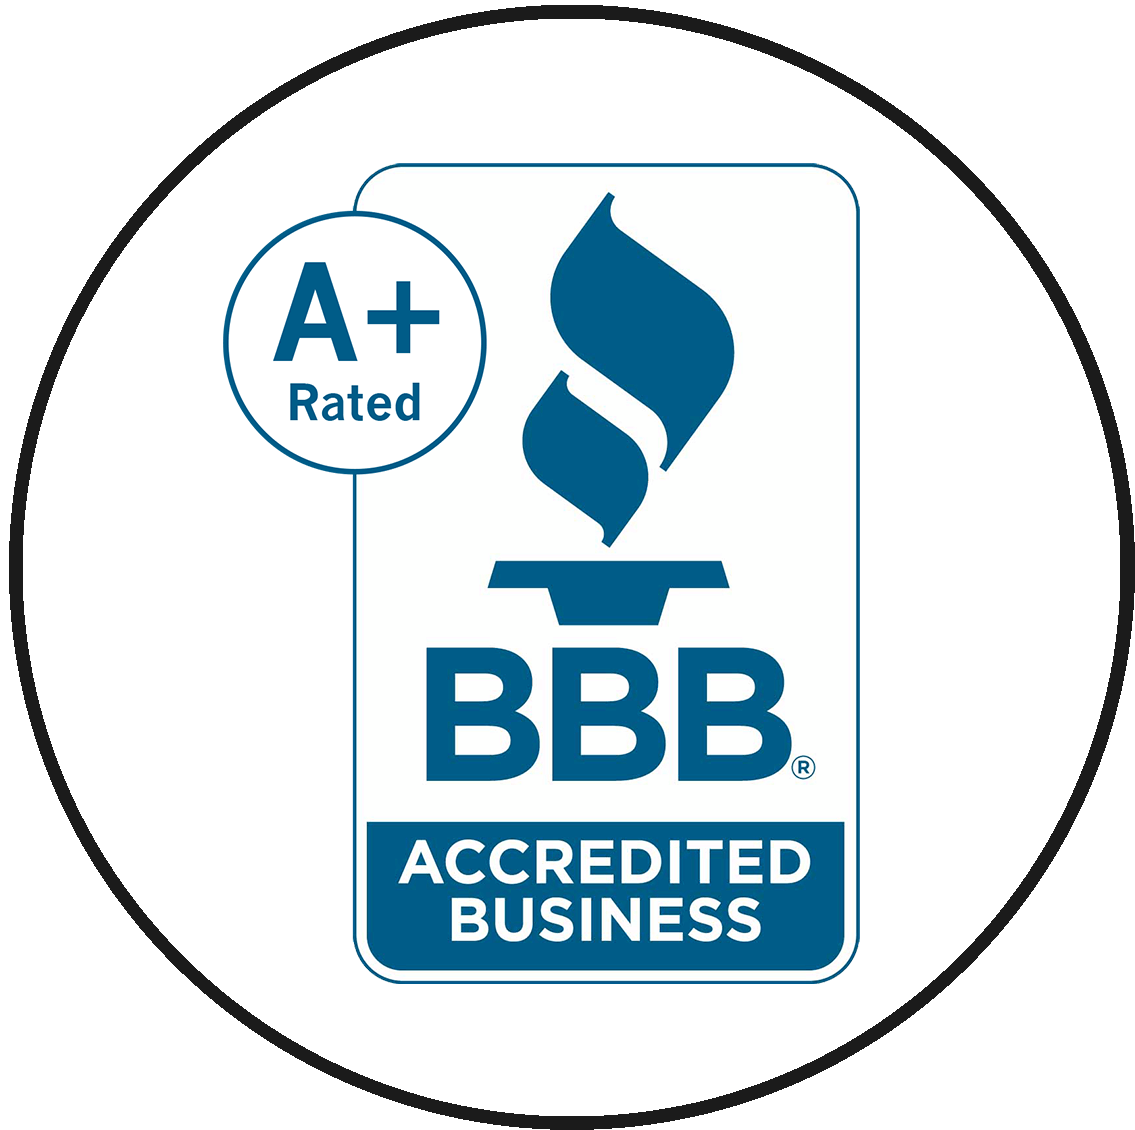 A+ Accredited Business